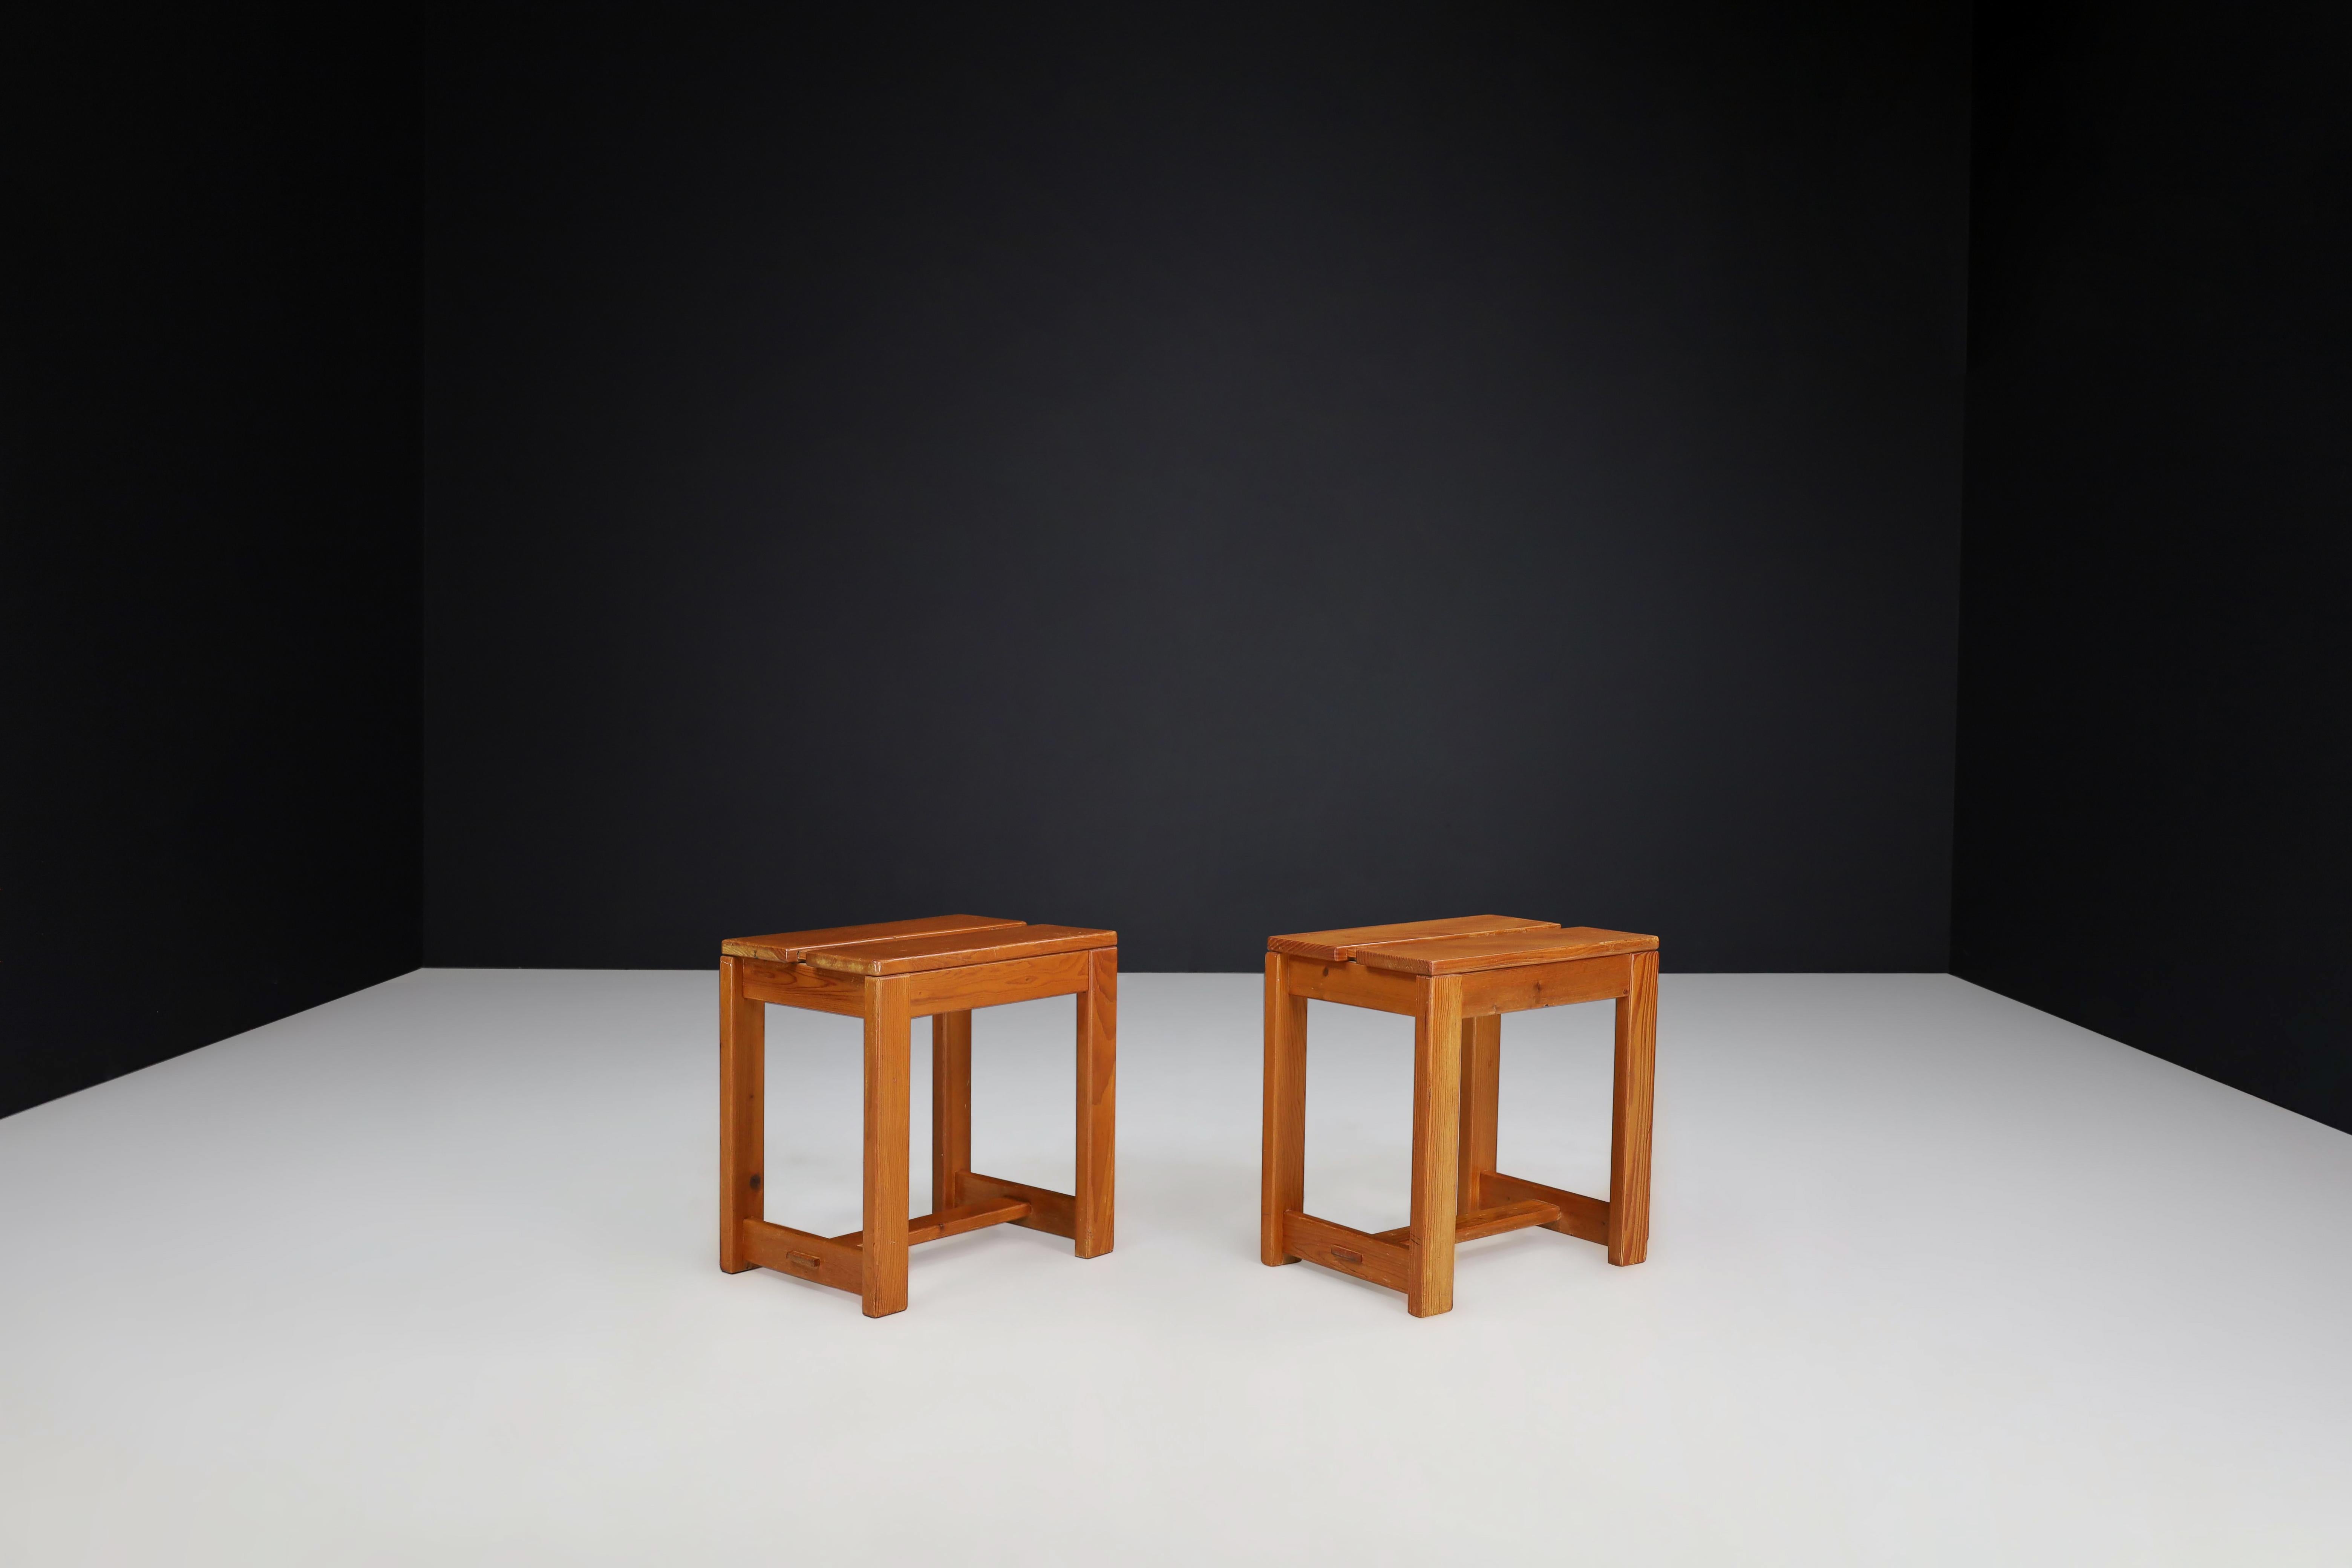 midcentury Pine stools in the style off Charlotte Perriand, France 1960s

These two pine wood stools were created in the style of Charlotte Perriand for the Les Arcs ski resort in France around 1960. Their design is simple and iconic, with clean